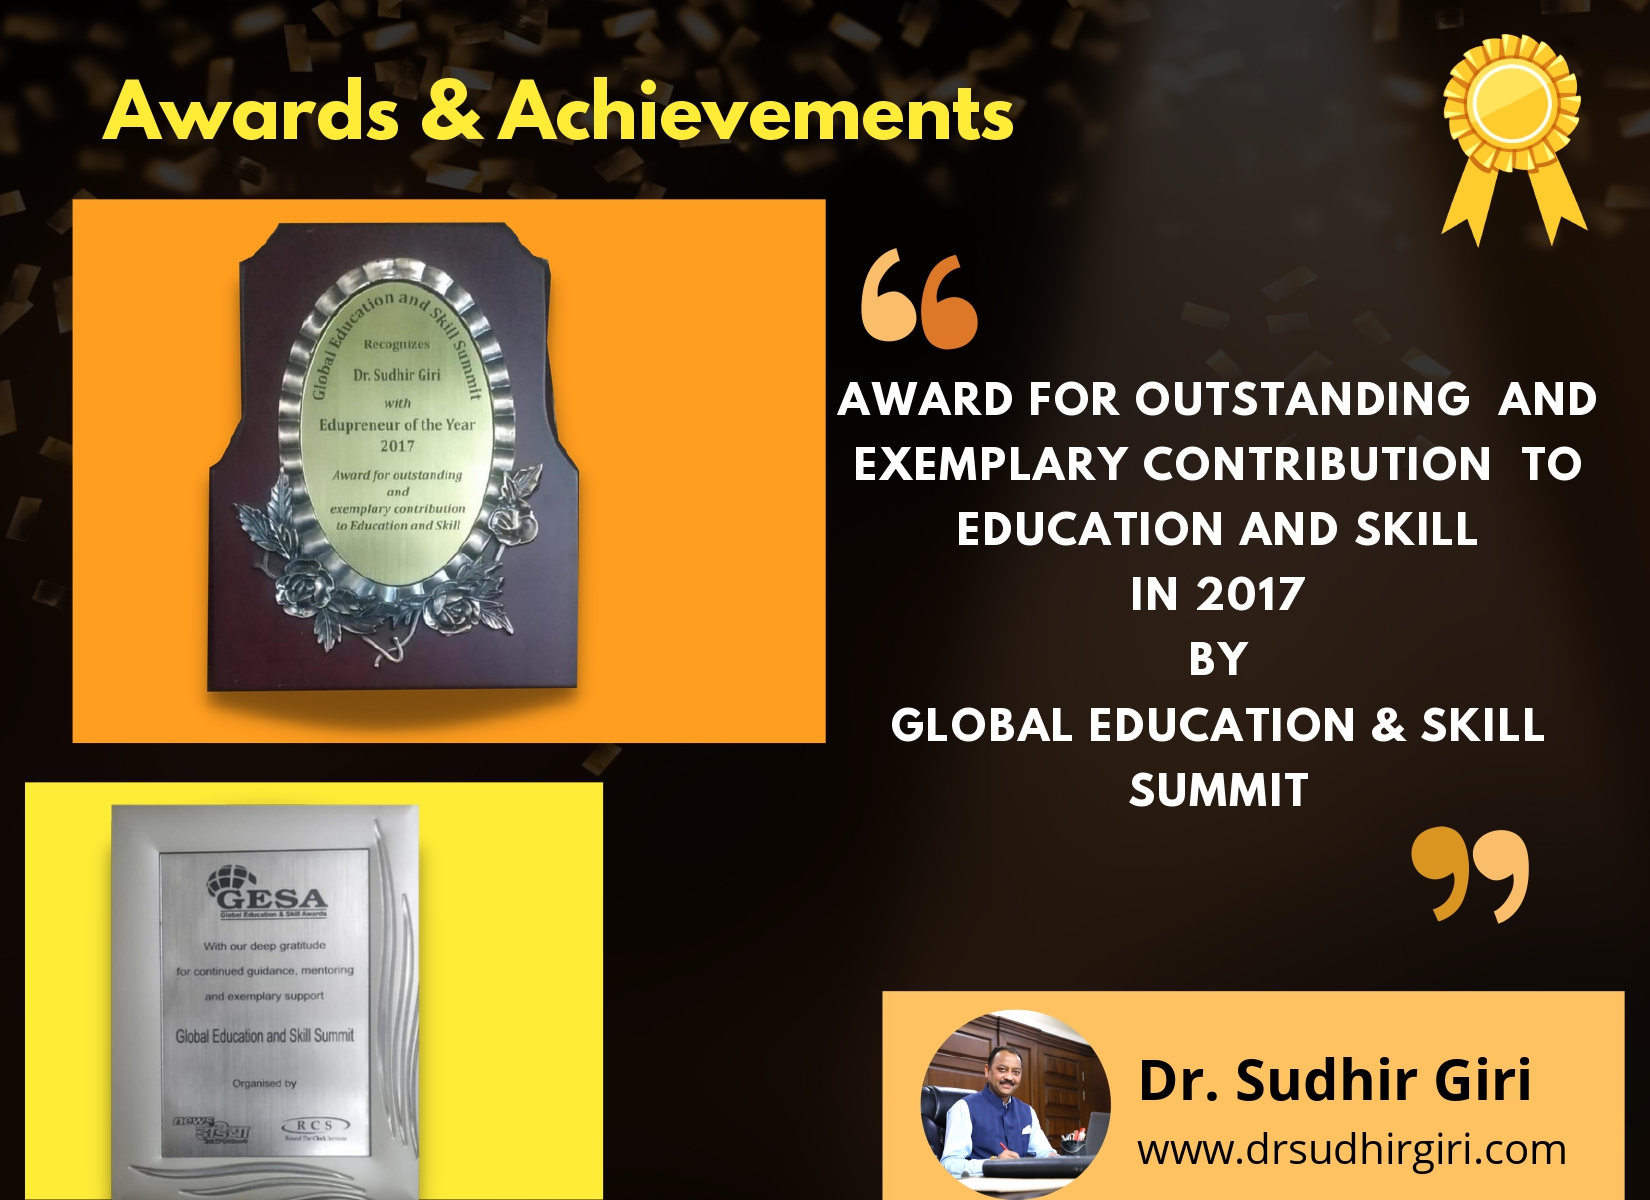 Dr Sudhir Giri - AWARD FOR OUTSTANDING AND EXEMPLARY CONTRIBUTION TO EDUCATION AND SKILL in 2017 BY Global Education & Skill Summit